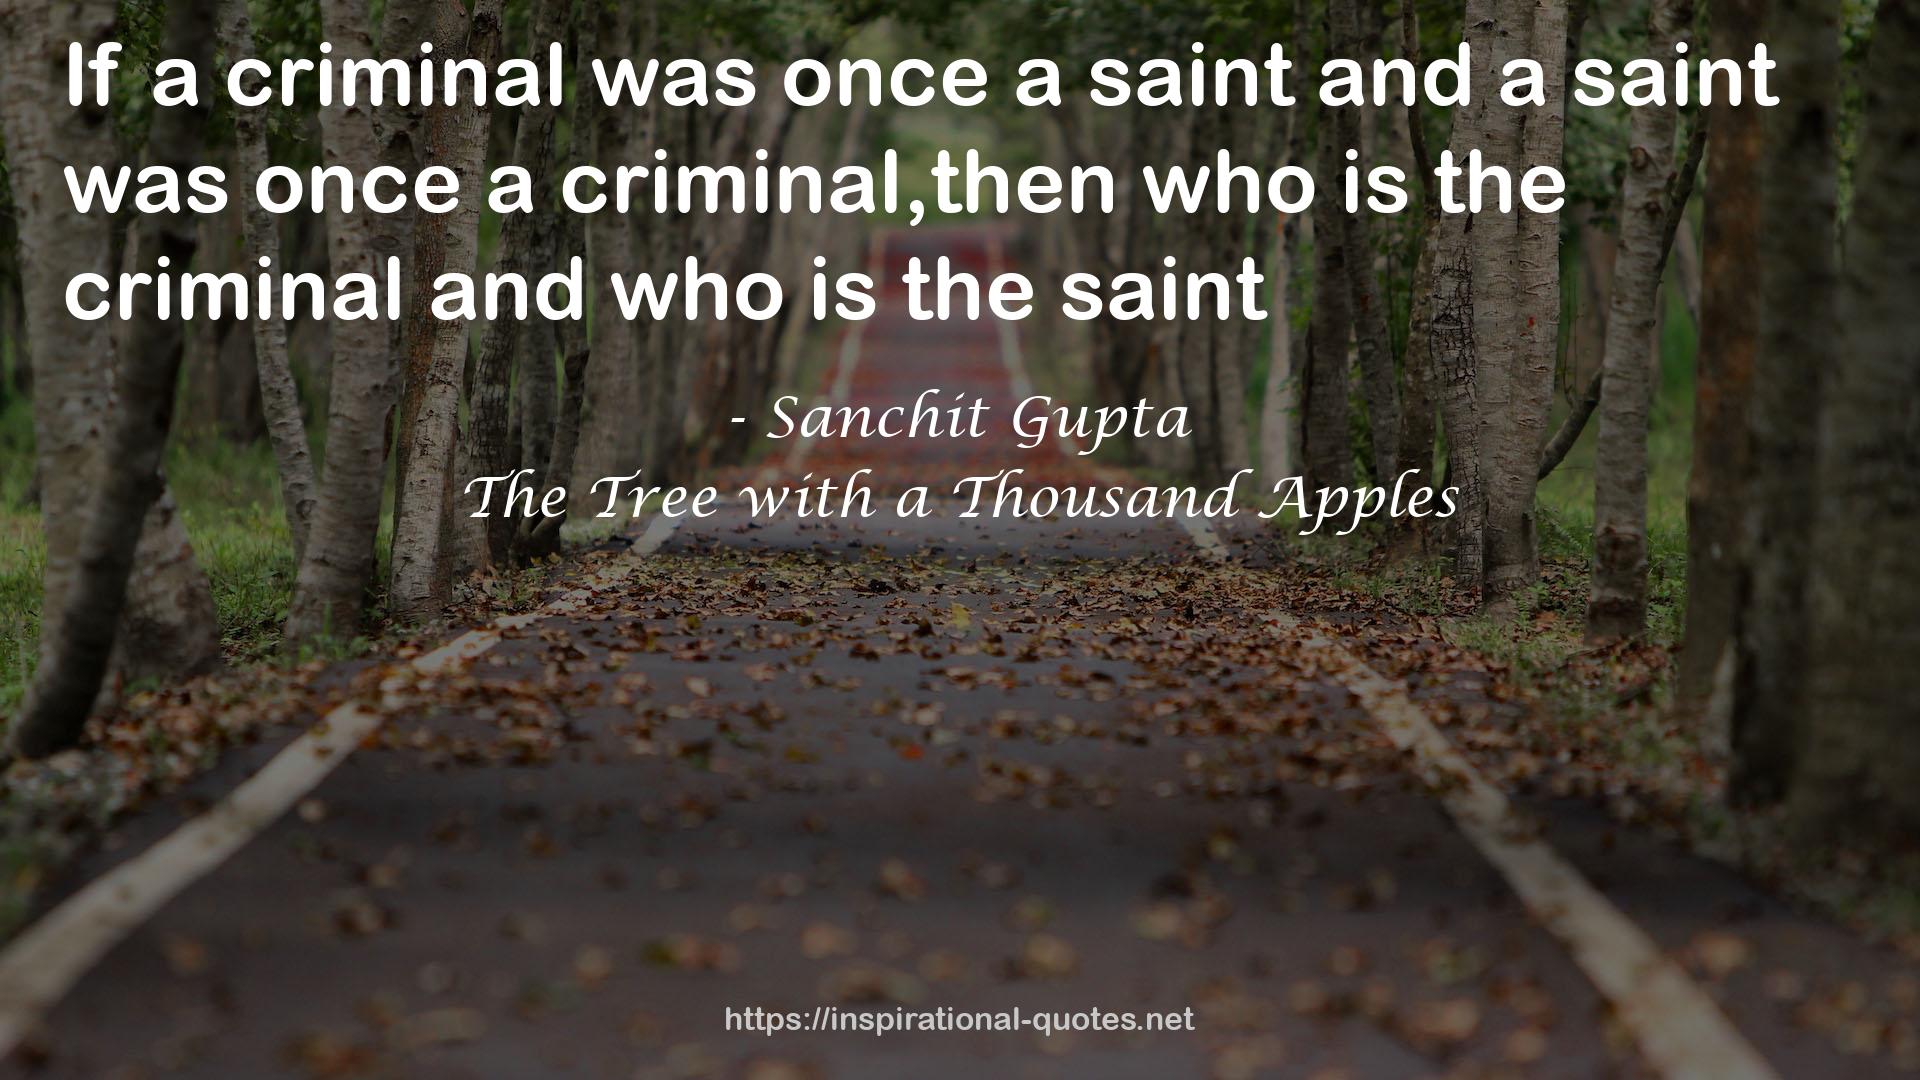 The Tree with a Thousand Apples QUOTES